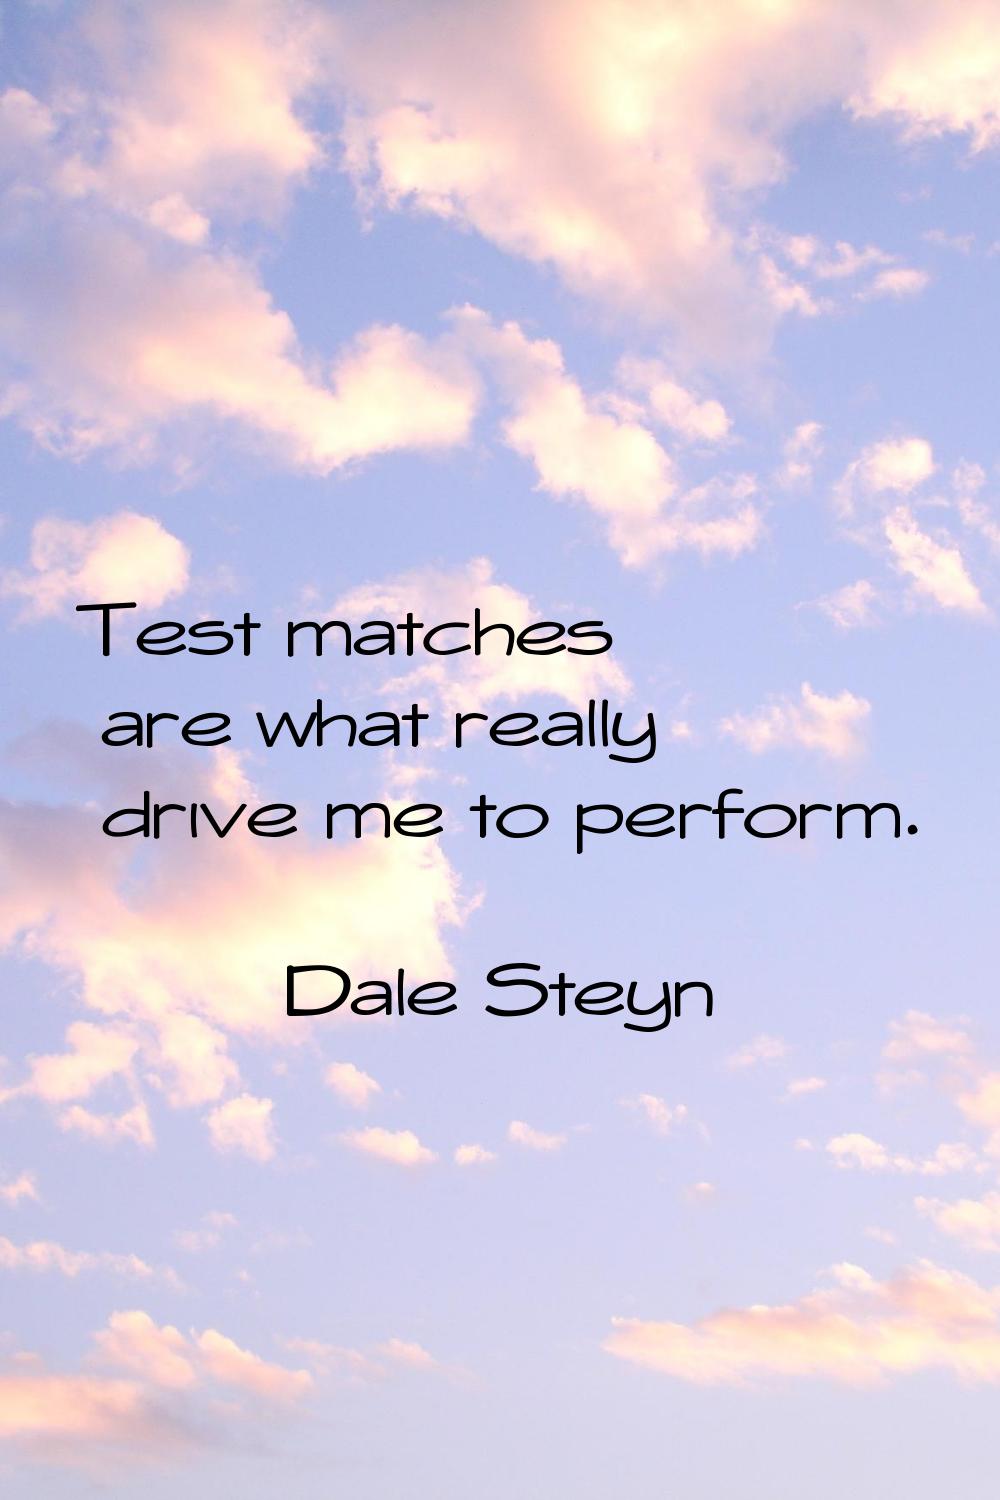 Test matches are what really drive me to perform.